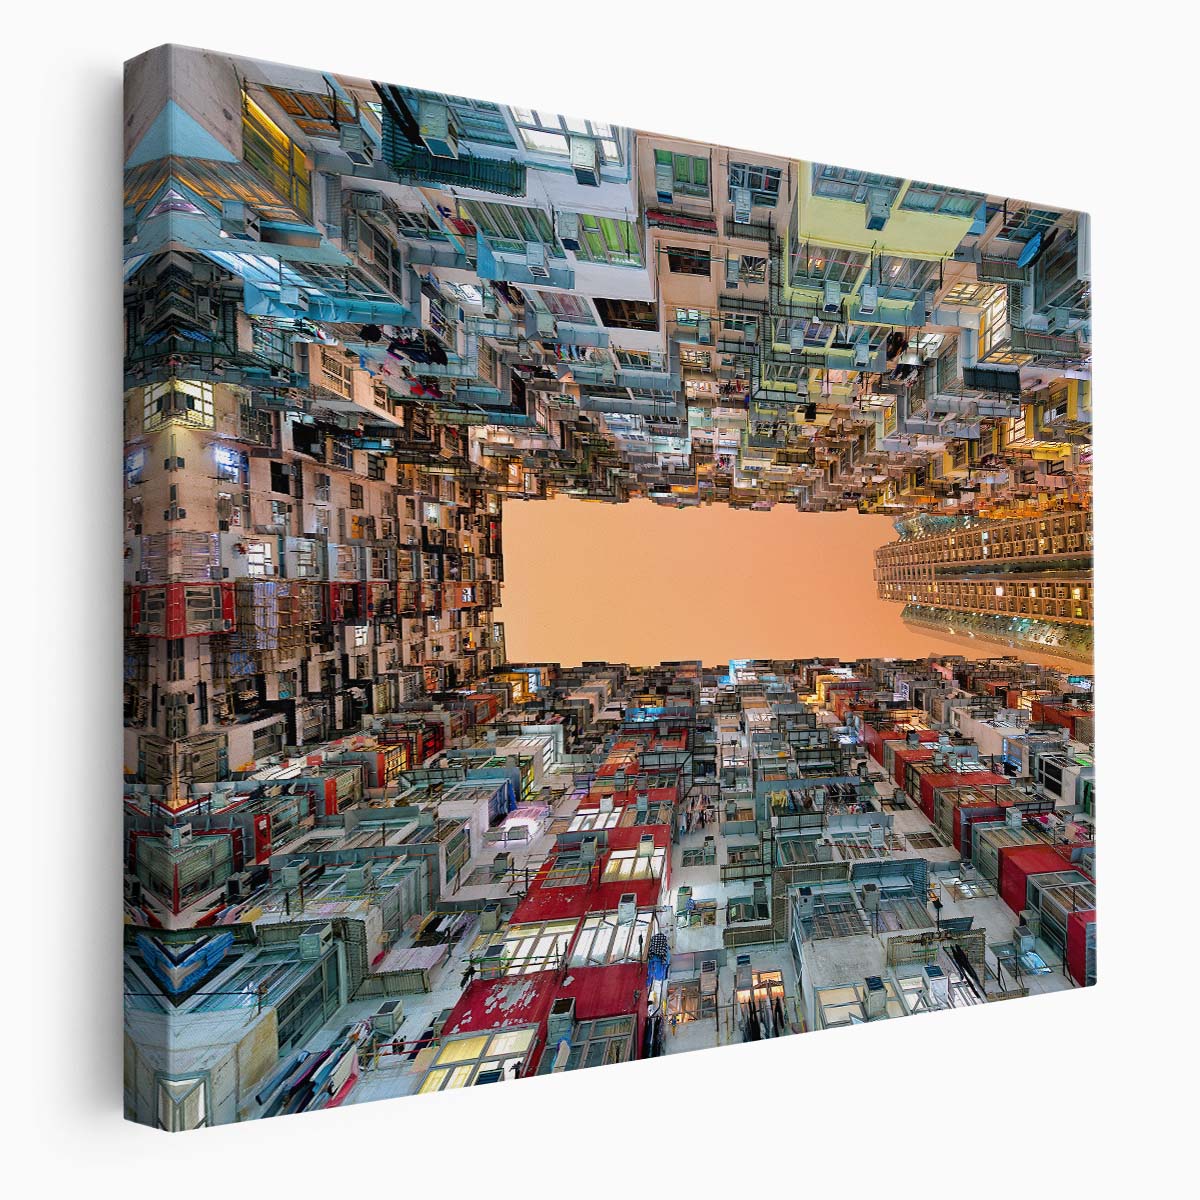 Futuristic Hong Kong Urban Density Wall Art by Luxuriance Designs. Made in USA.